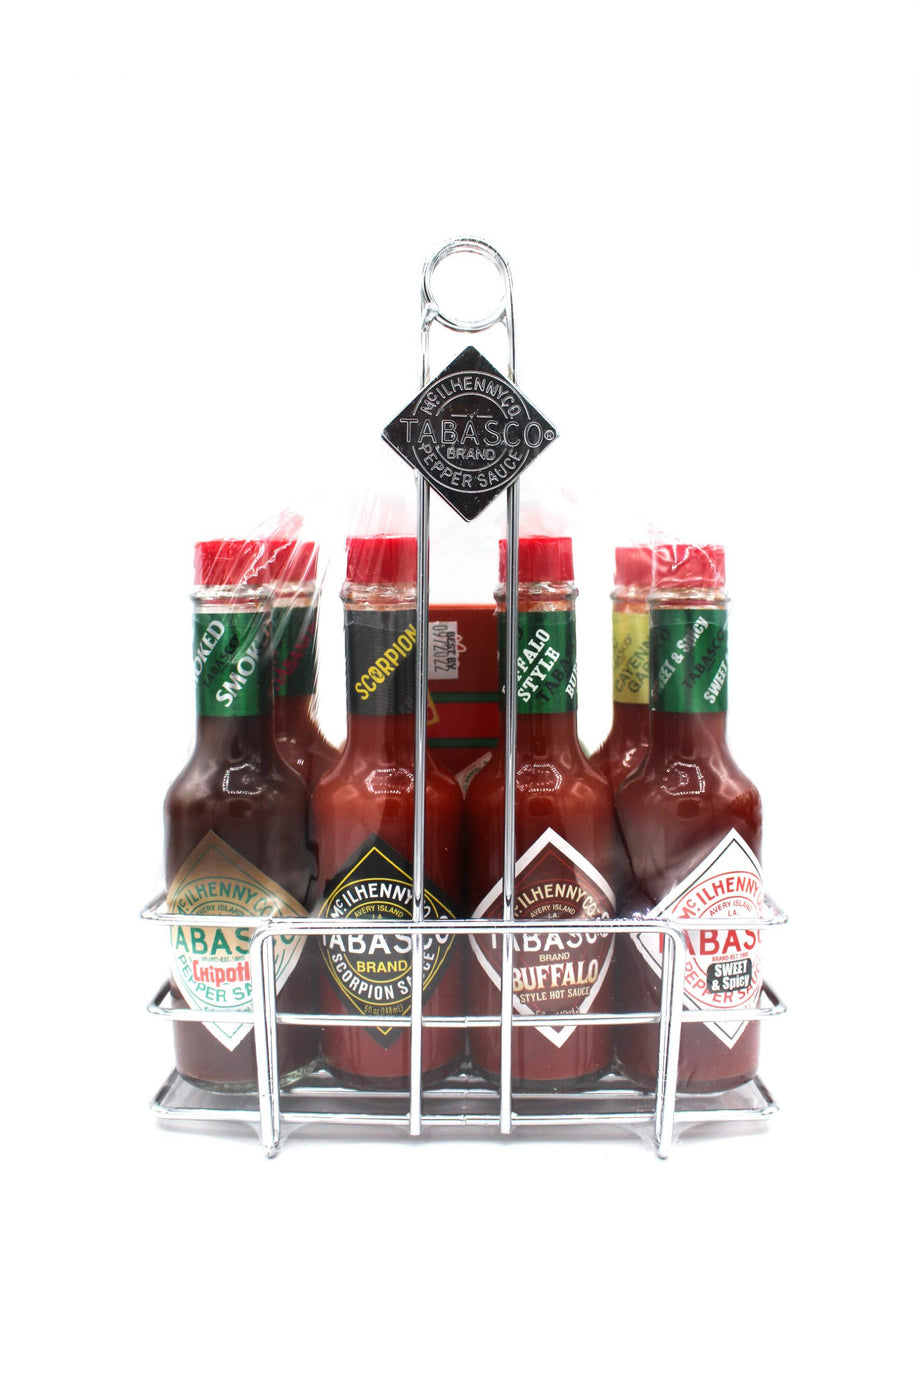 Shop TABASCO® Products Online